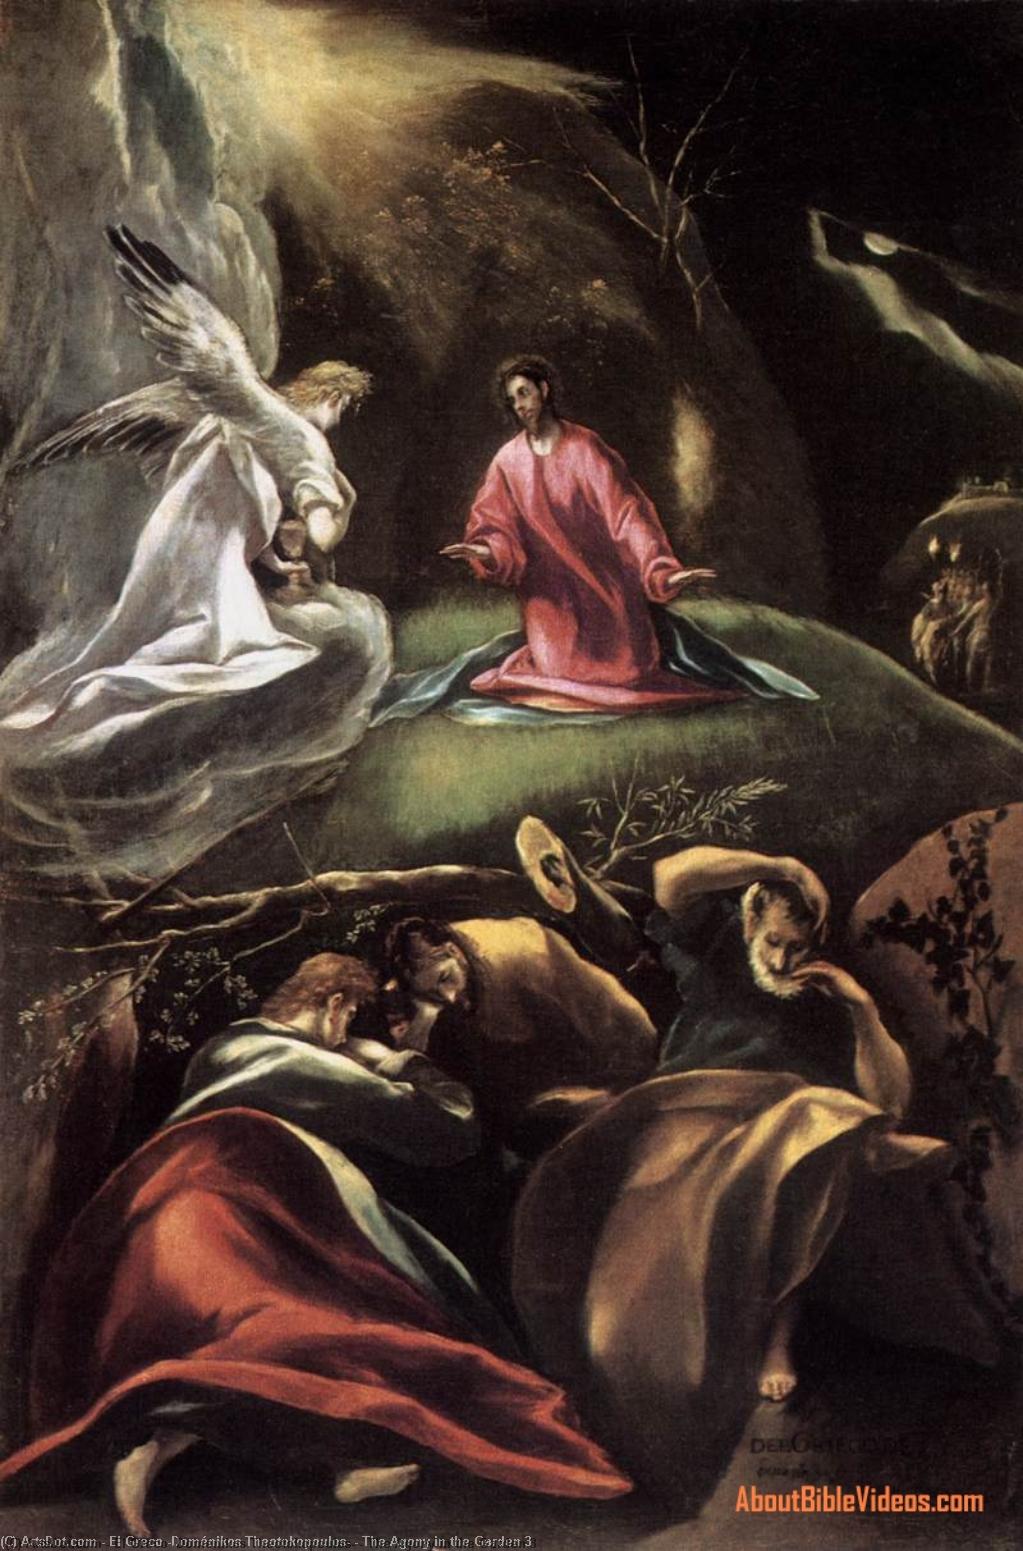 Wikioo.org - สารานุกรมวิจิตรศิลป์ - จิตรกรรม El Greco (Doménikos Theotokopoulos) - The Agony in the Garden 3